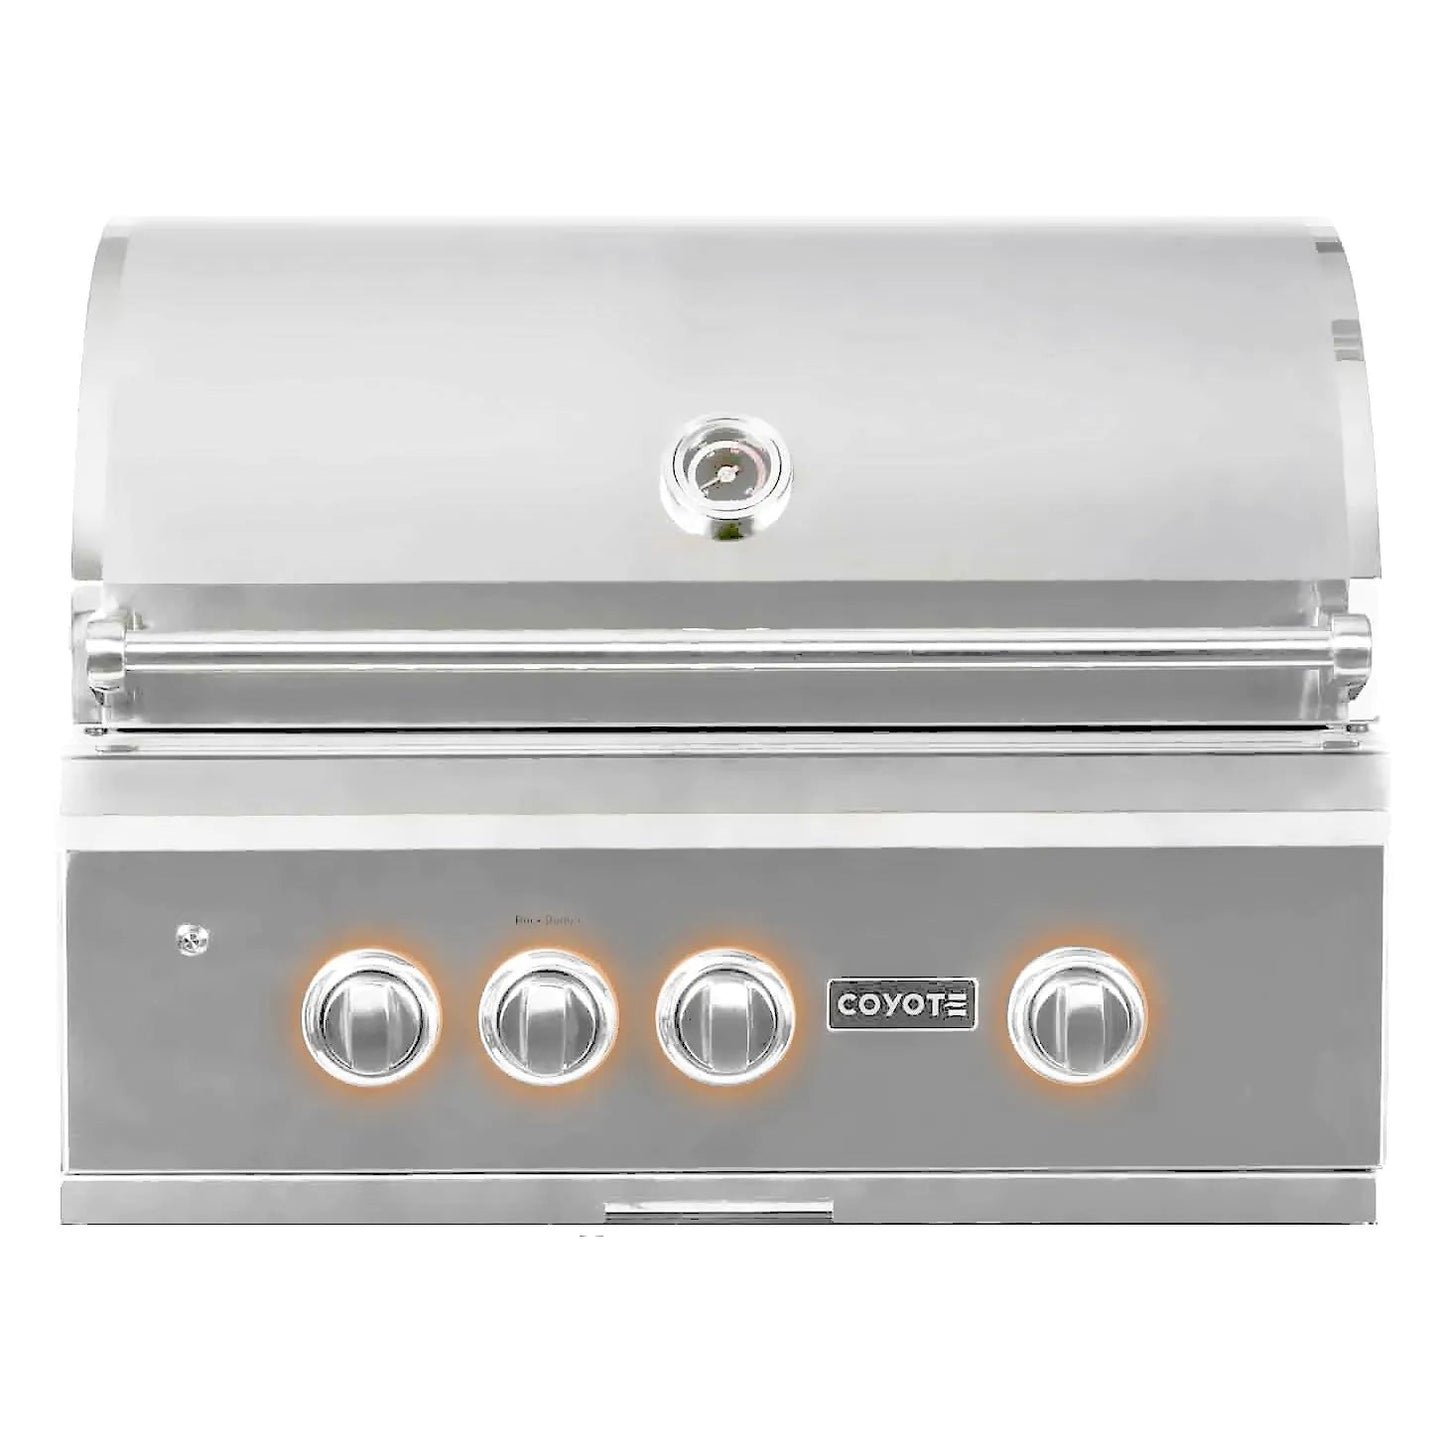 Coyote S Series 30 inch Built in grill with Rotisserie and Infared - Sunzout Outdoor Spaces LLC